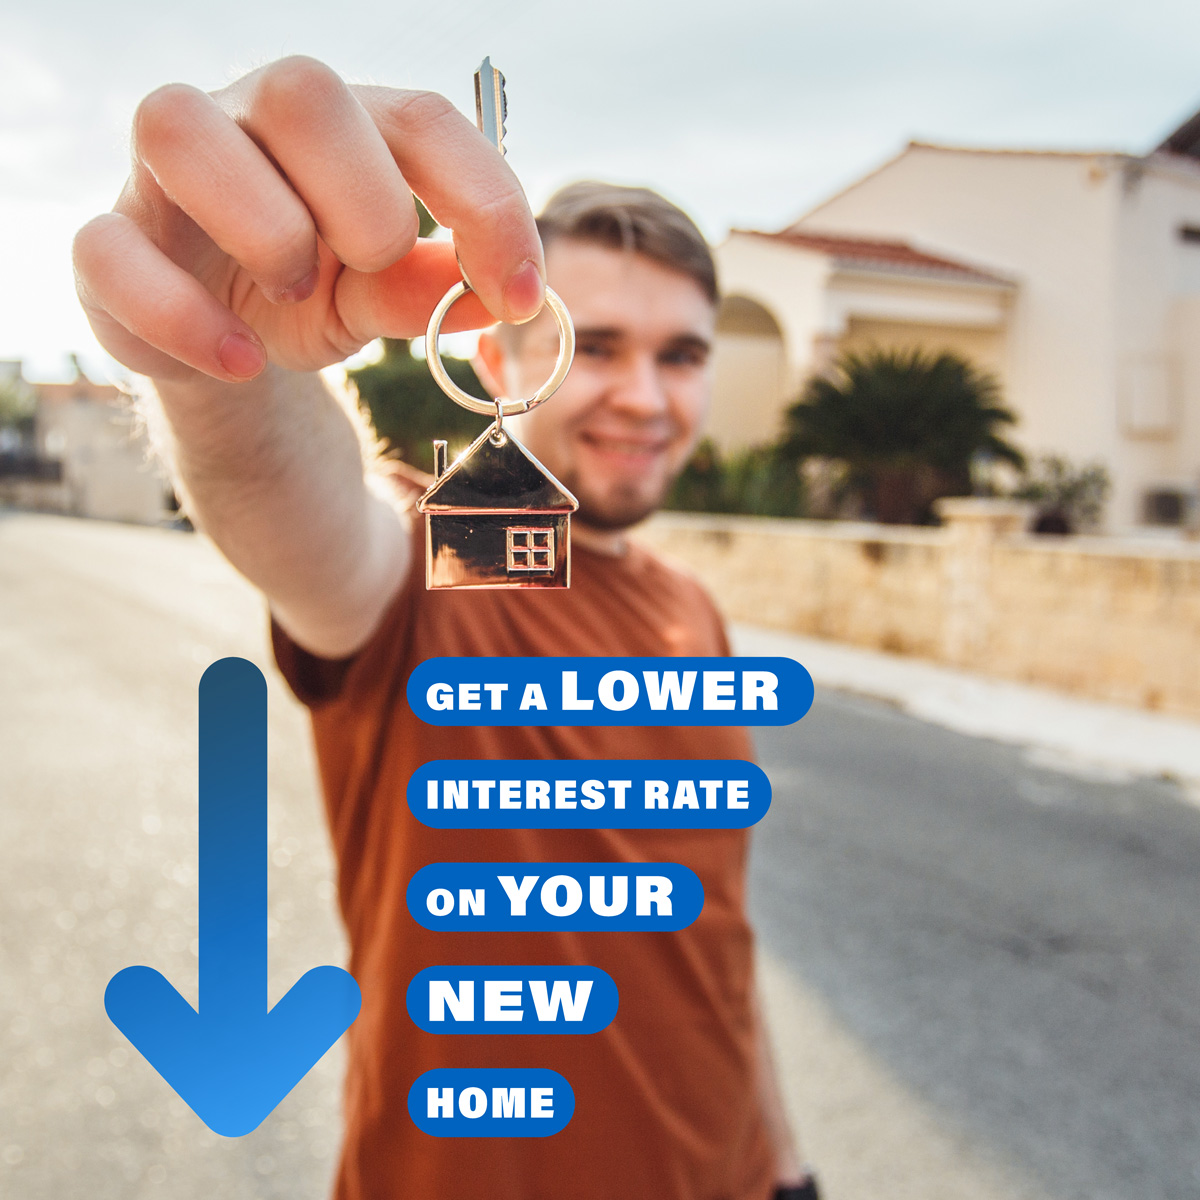 How does a lower interest rate on your mortgage sound? Let me show you how to buy down your rate by up to 3% at the start of your loan. Contact me and I’ll tell you how it works. #mortgageloan #interestrates #firsttimehomebuyer #seattlerealestate #dallasrealestate